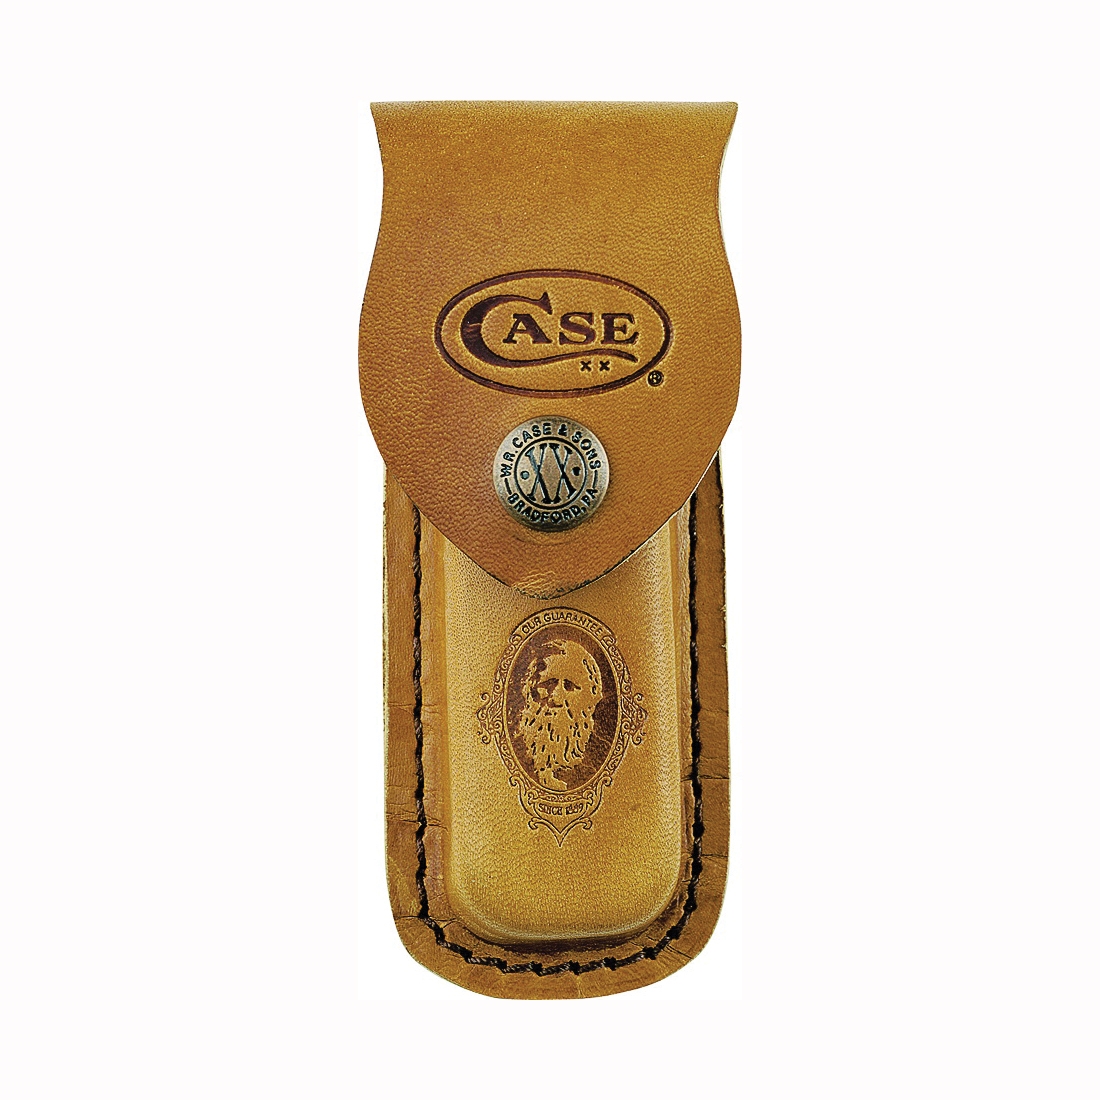 CASE 09026 Sheath, Leather, For: All Medium Size Case Folding Knives - 1